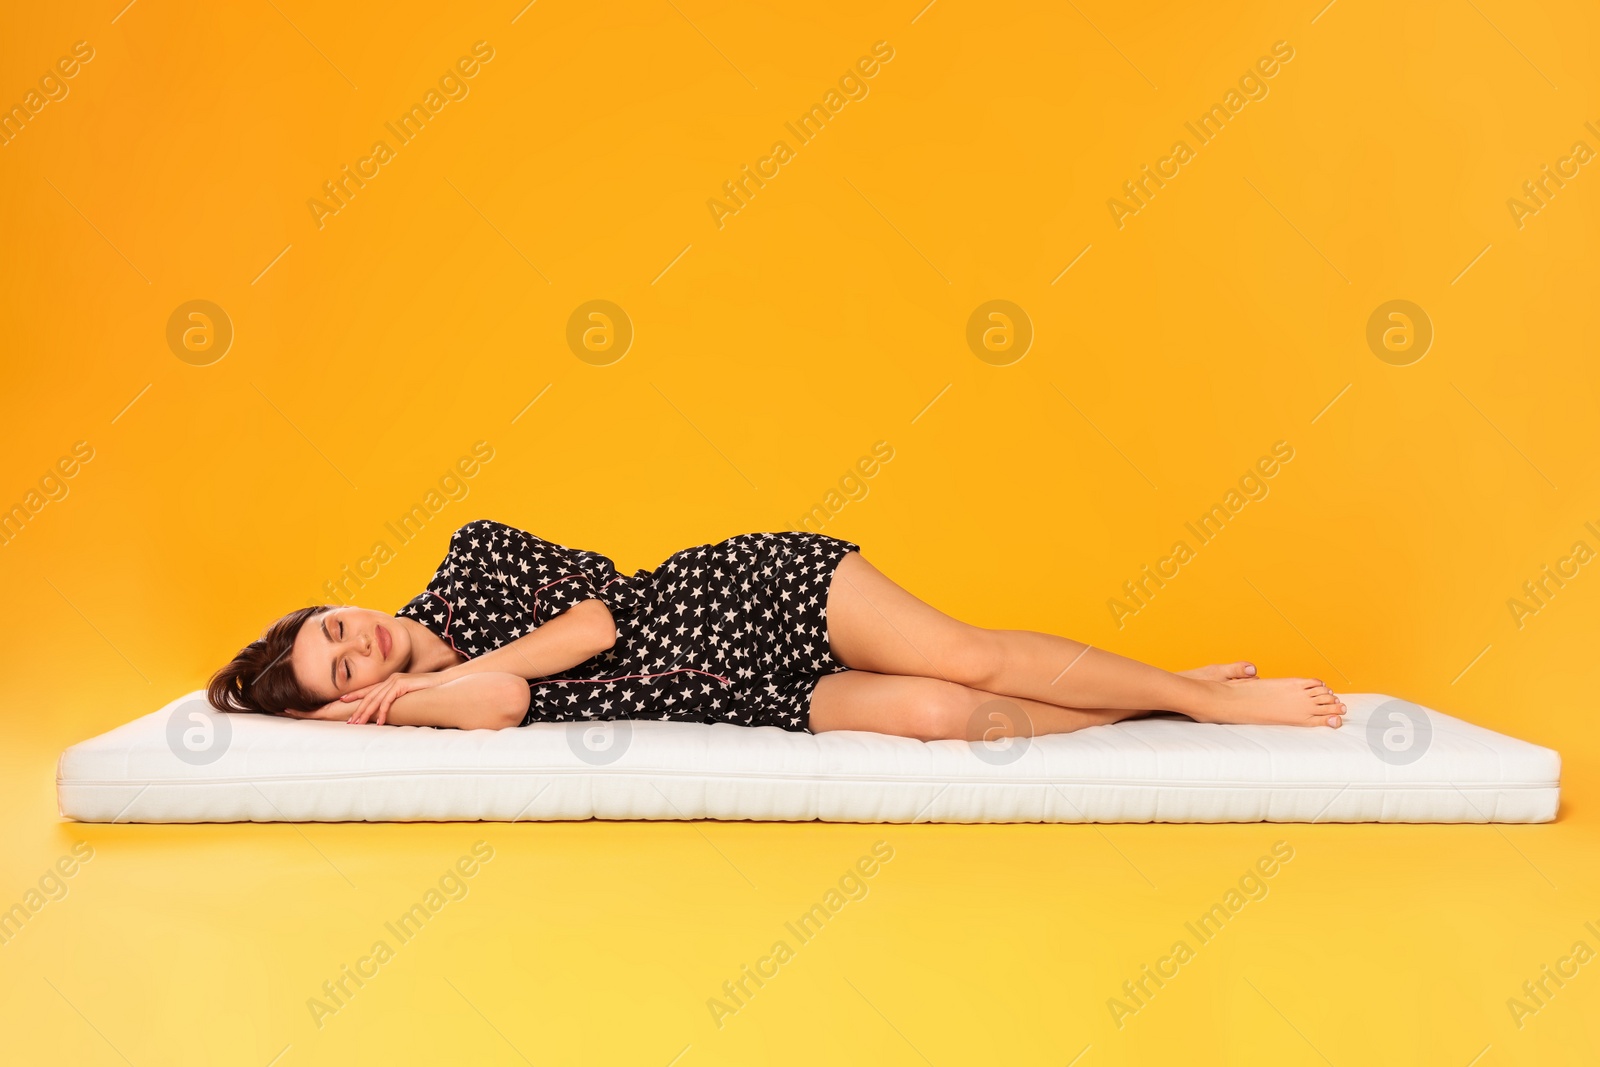 Photo of Young woman sleeping on soft mattress against orange background